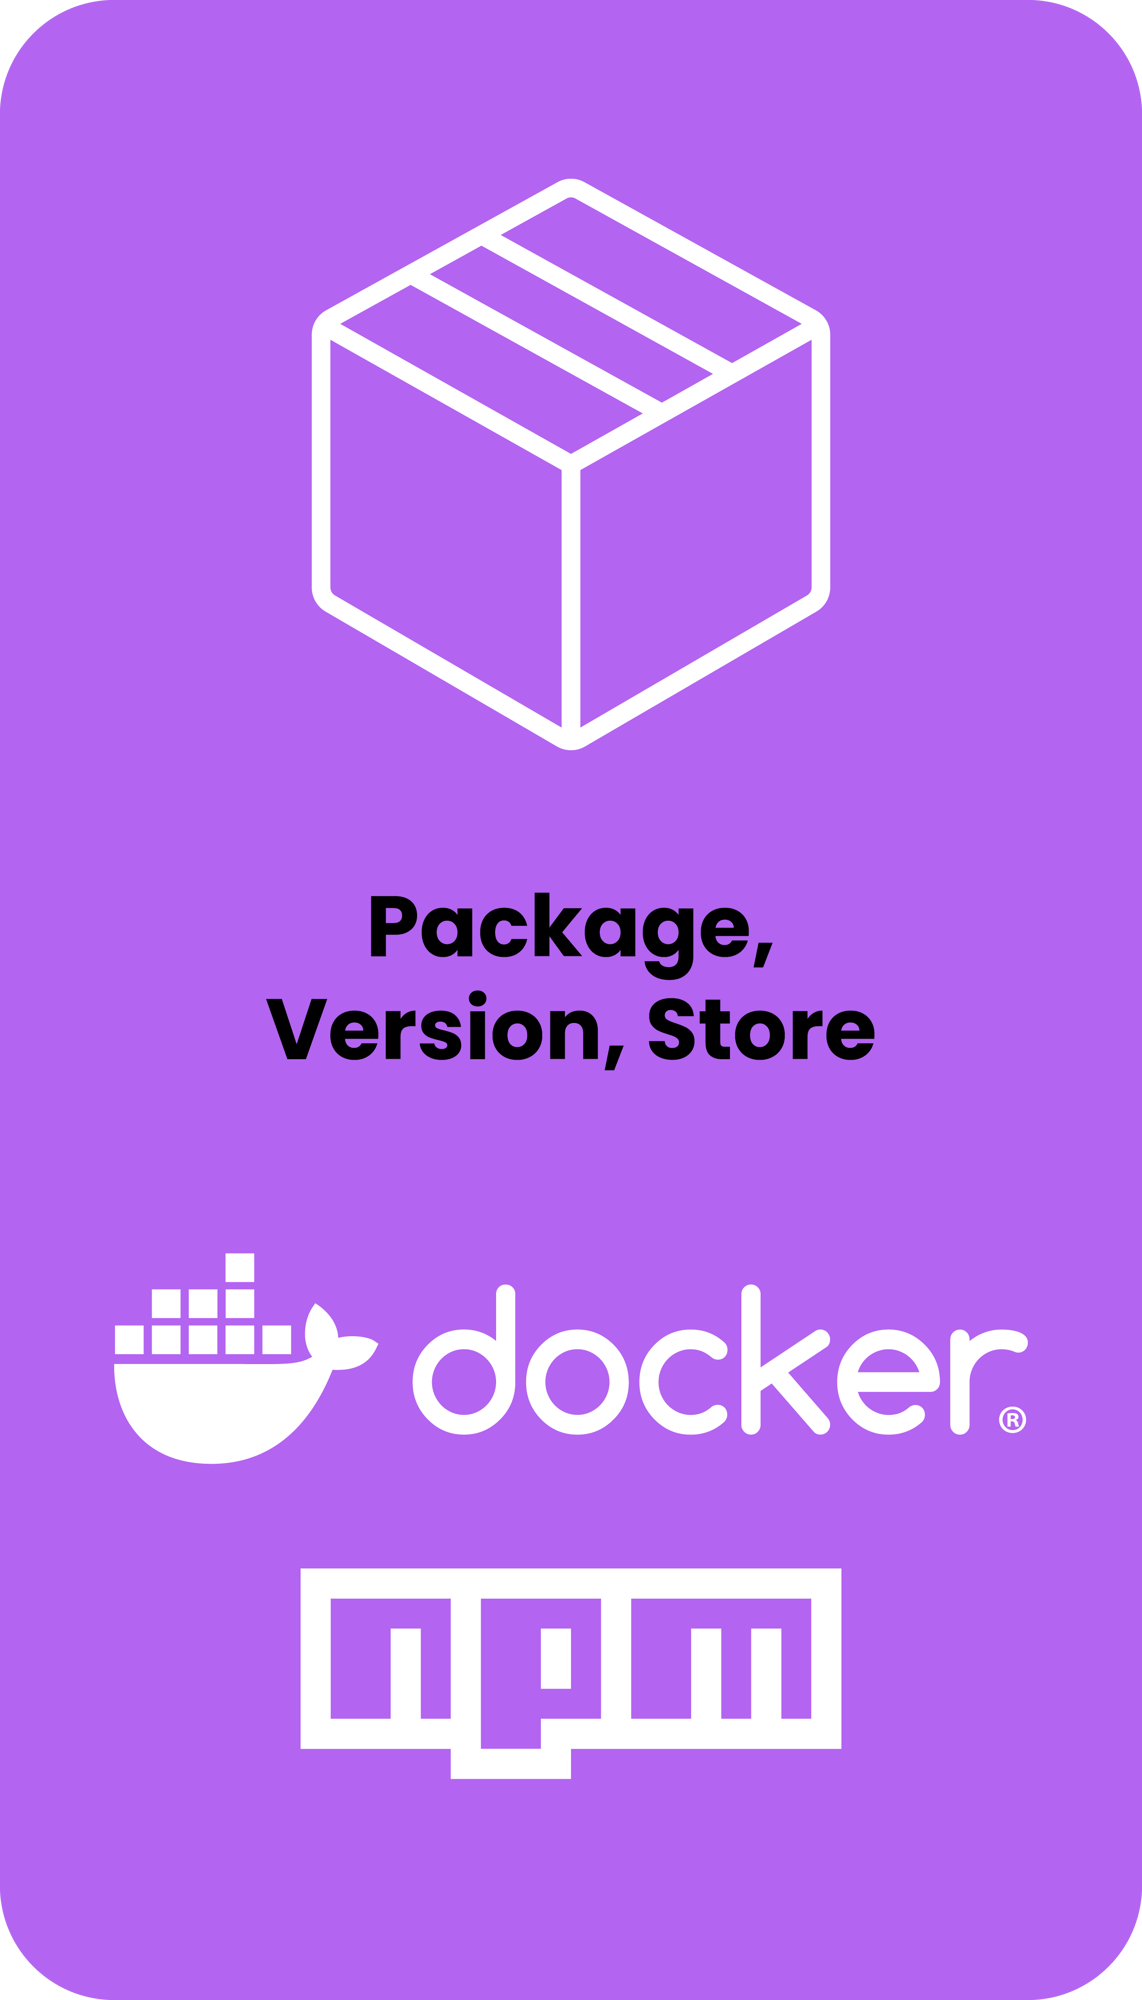 Package, Version, Store. Technologies include Docker and npm.